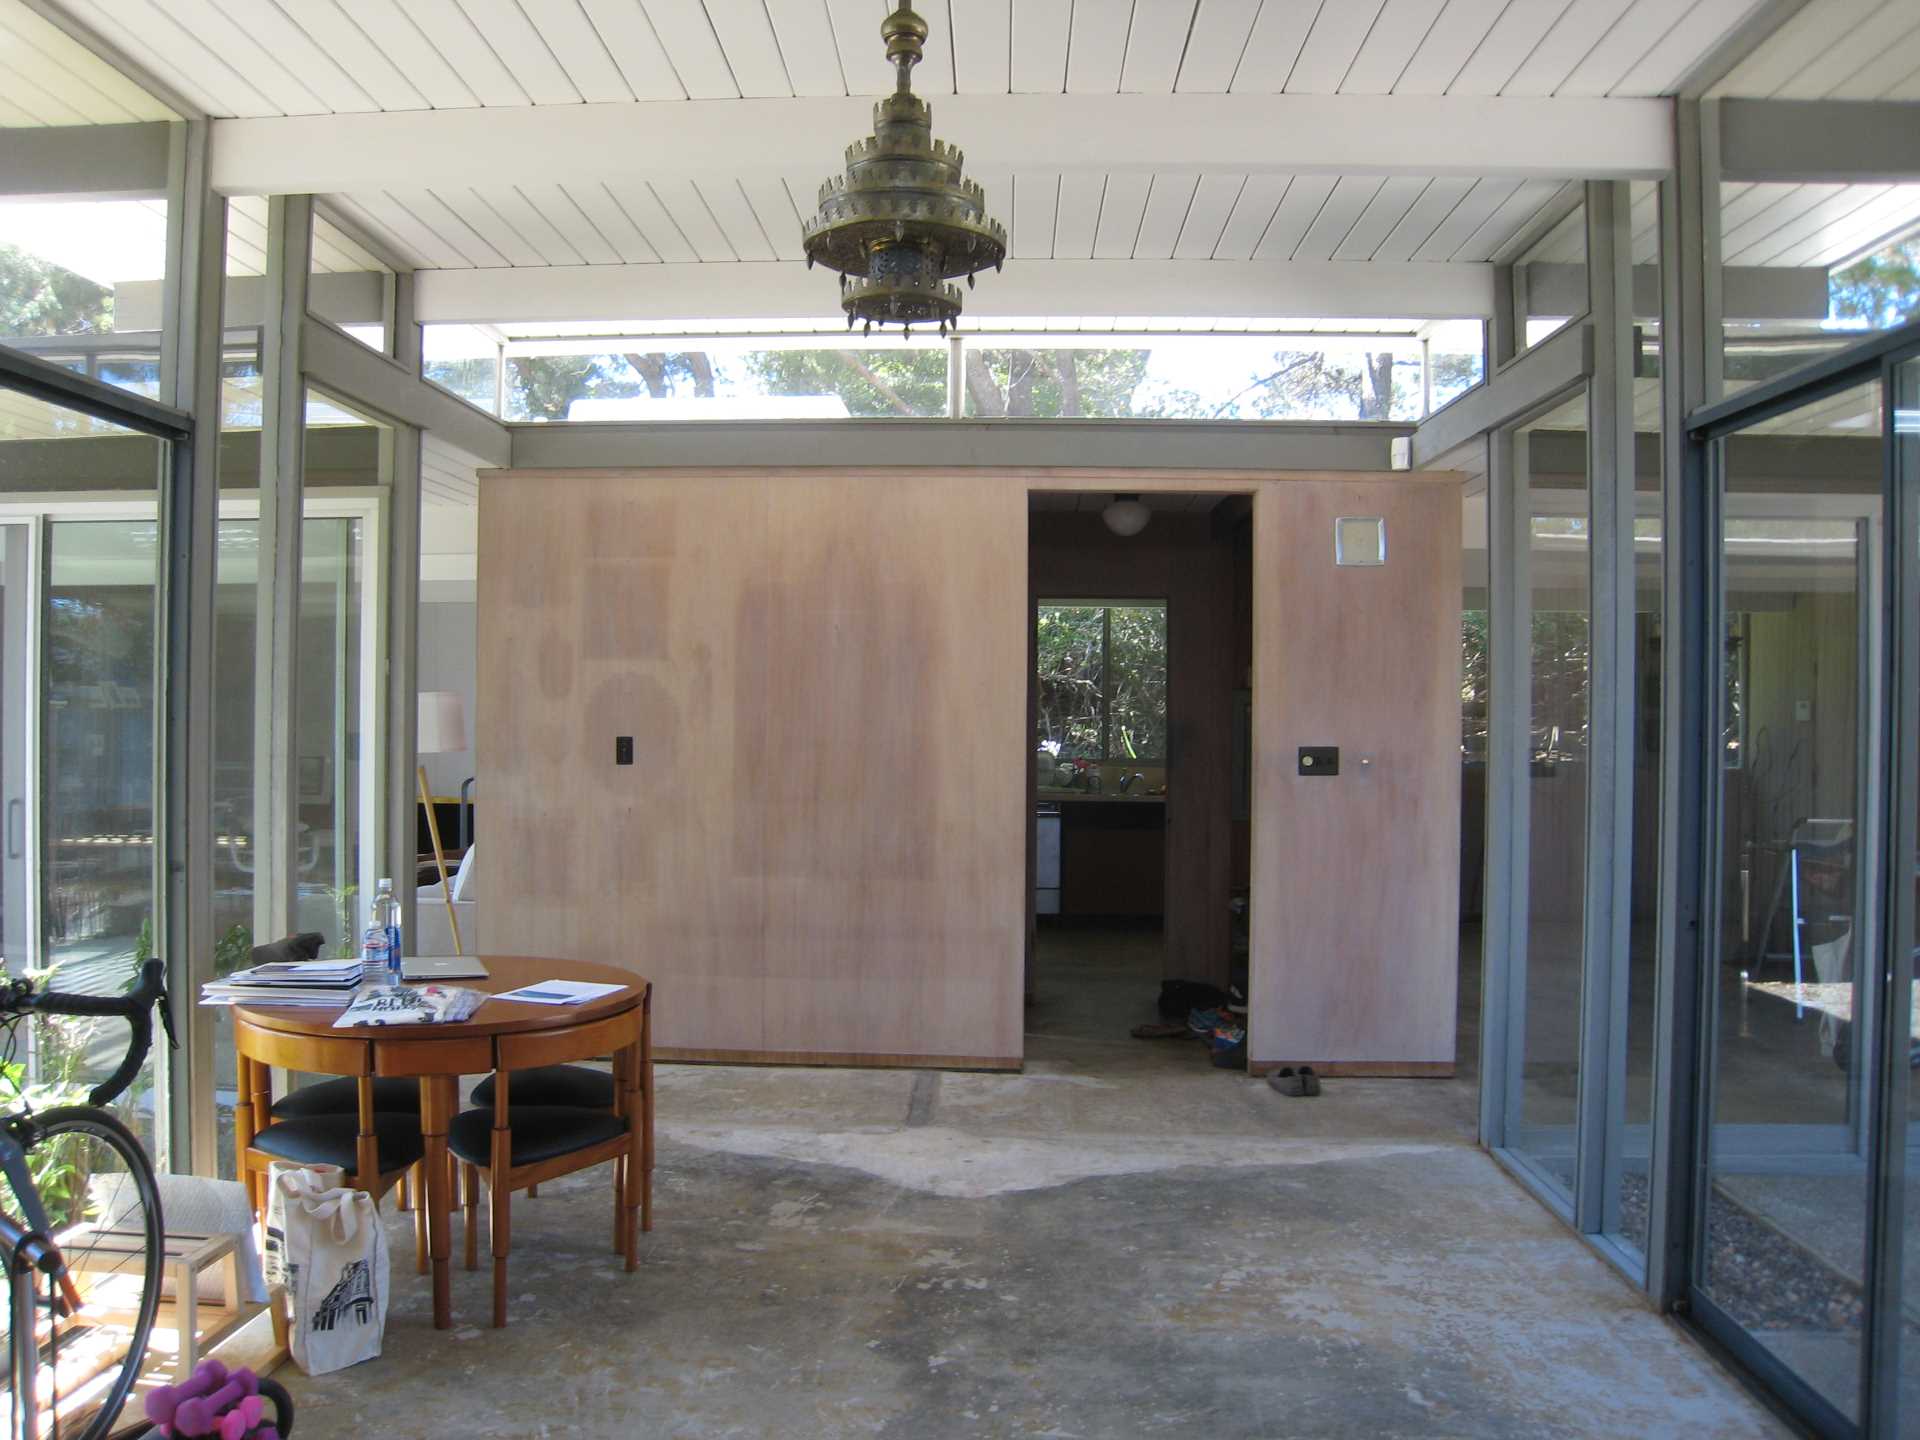 'Before' dining room photo of an Eichler home.